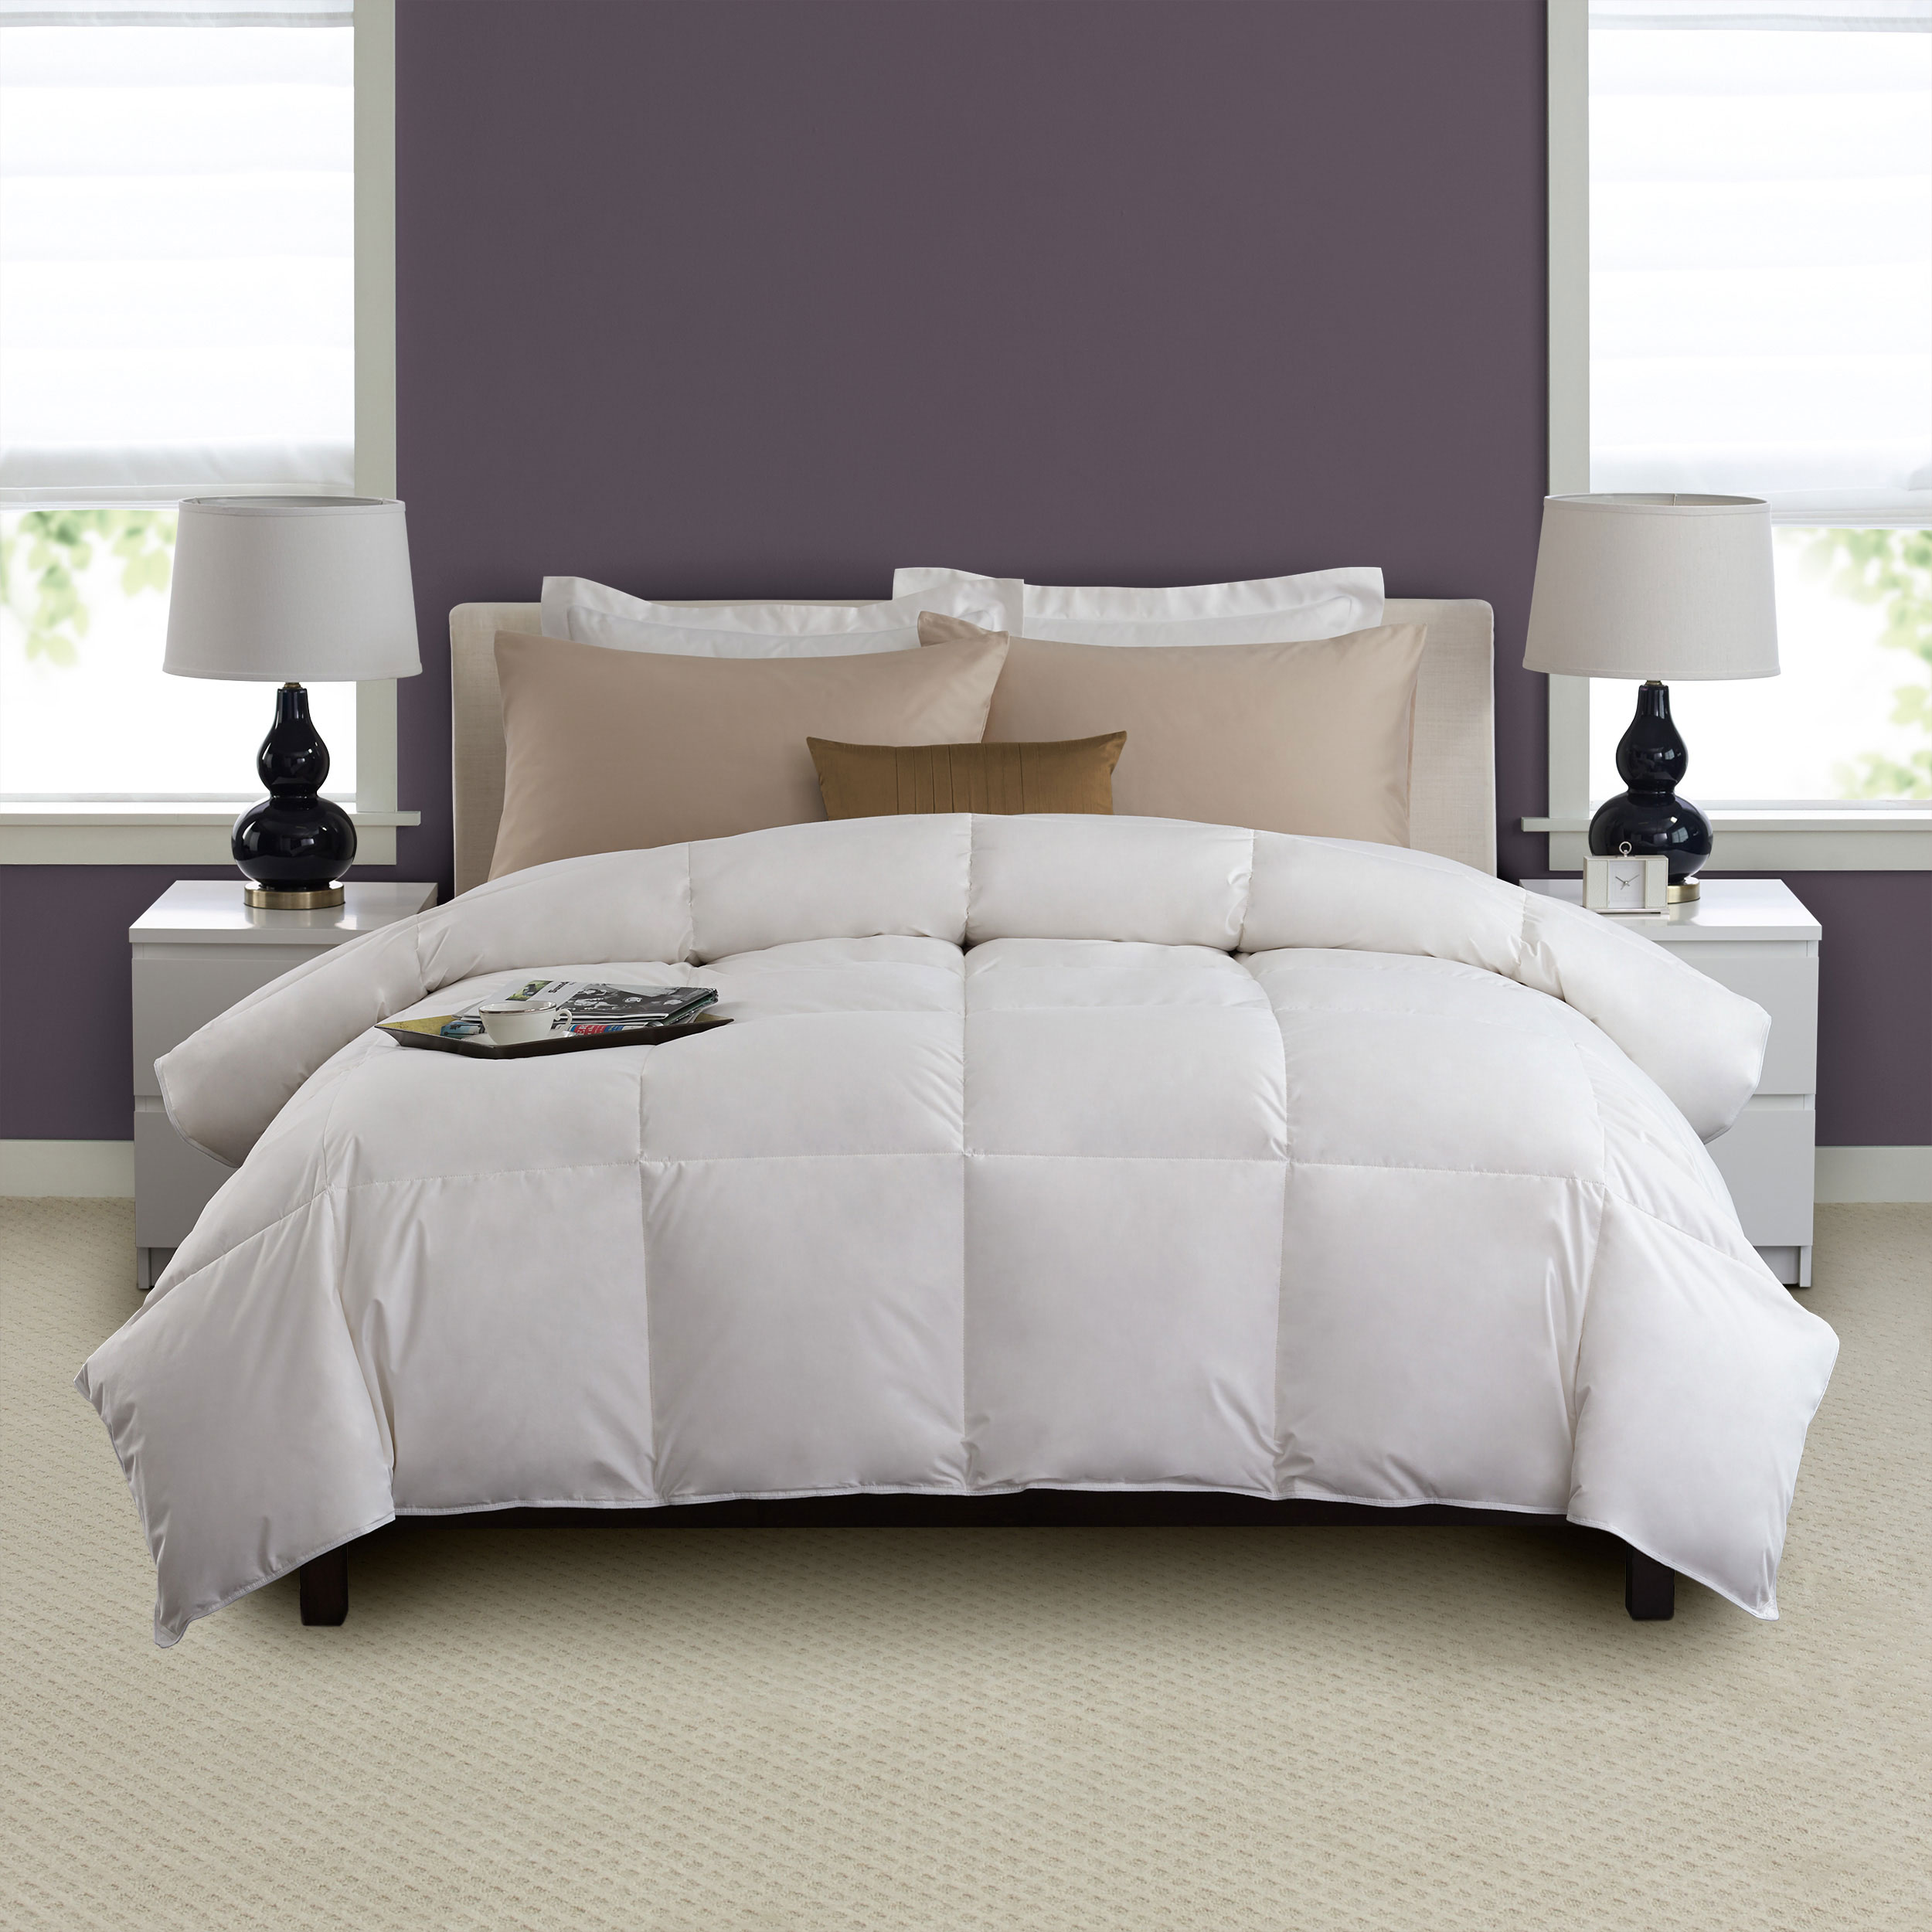 Pacific Coast Hotel Down Comforter 230 Thread Count 550 Fill Power Down - Queen